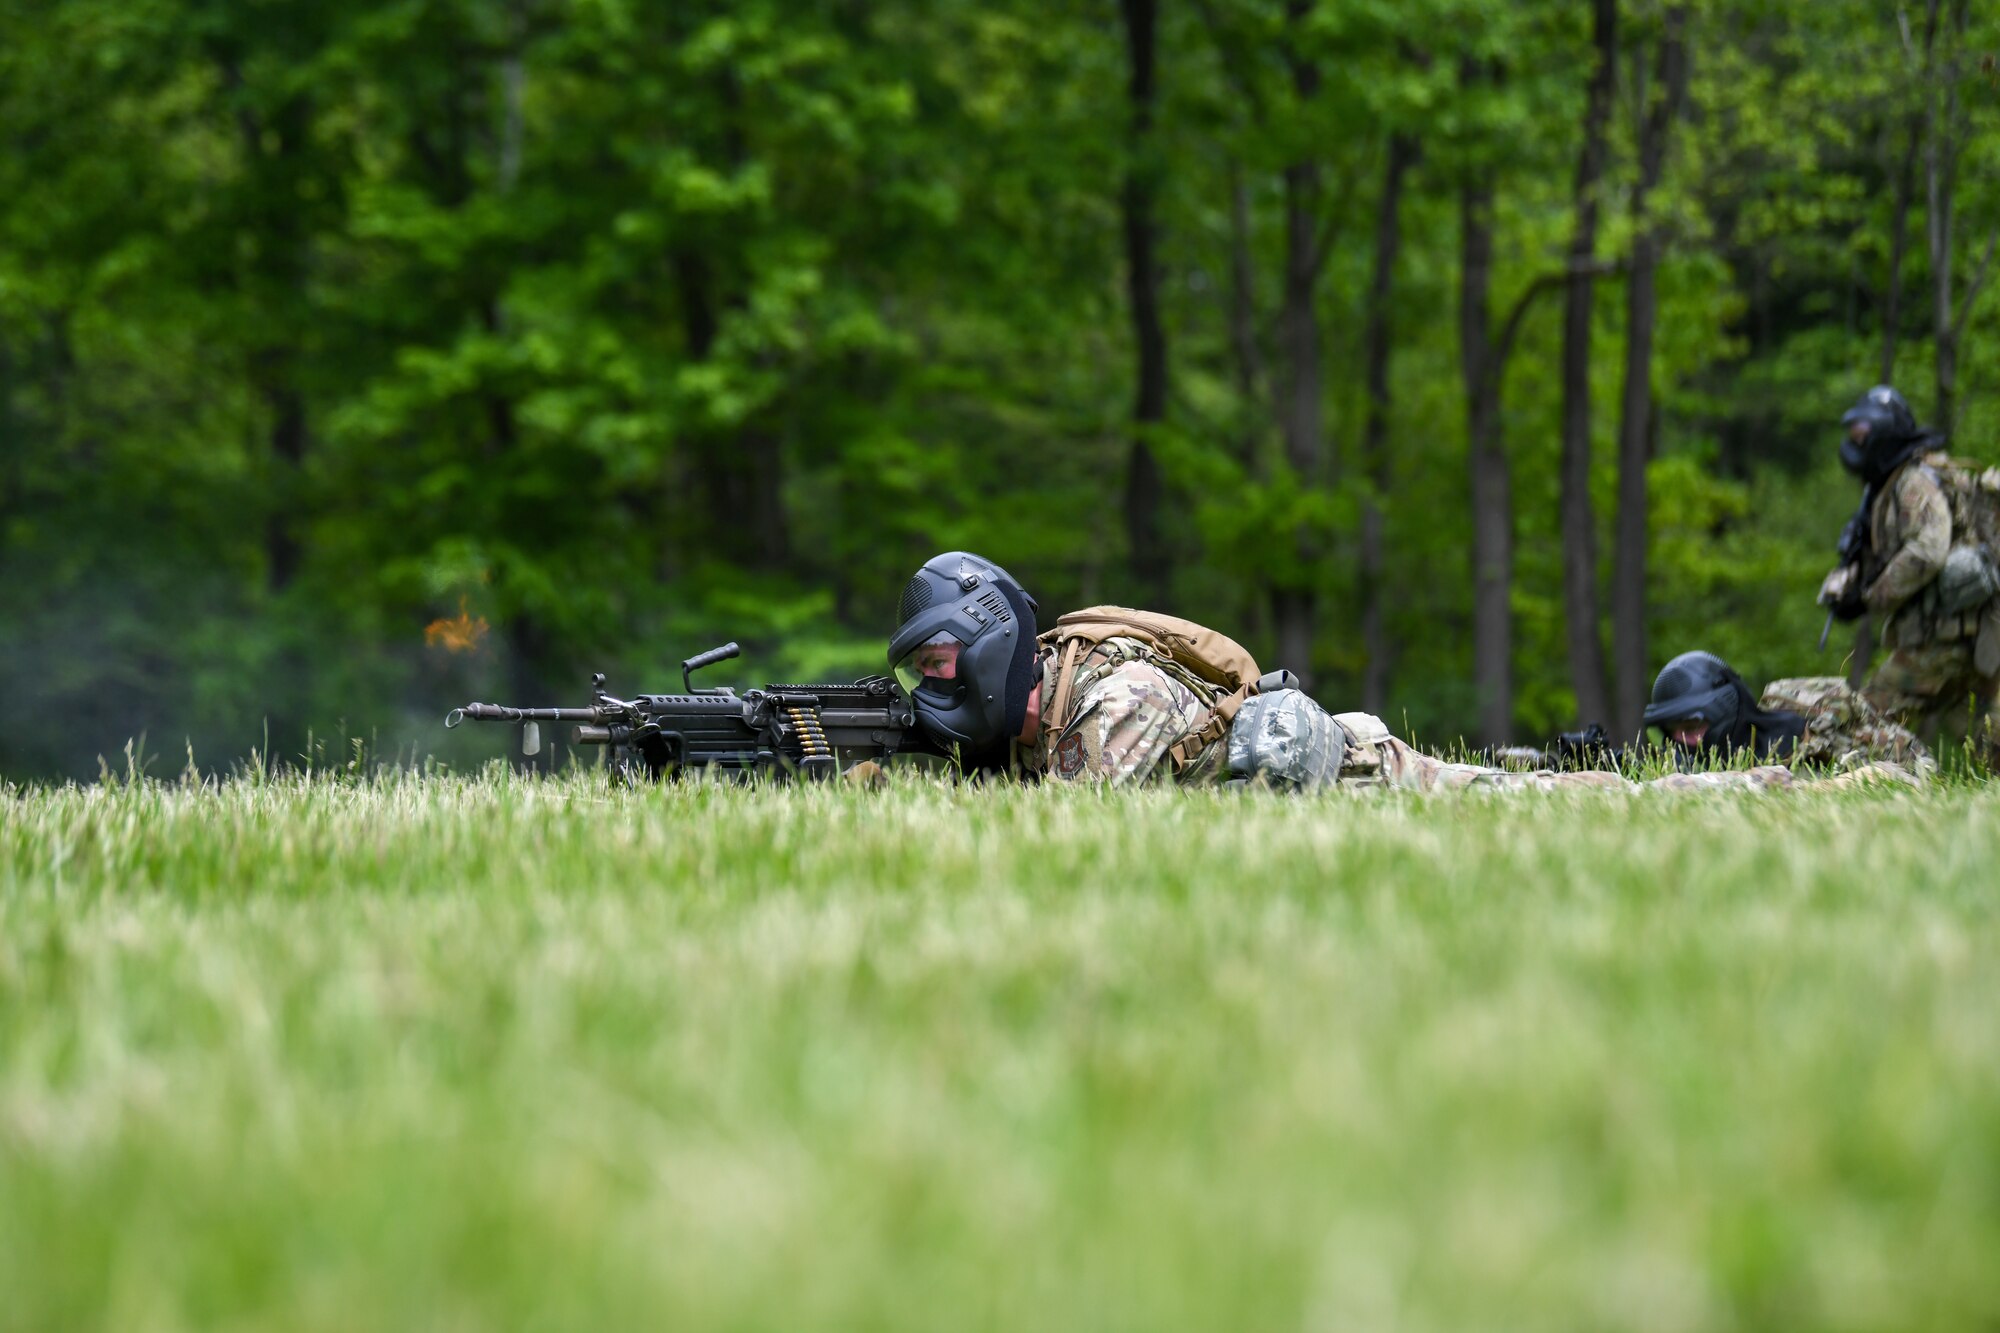 An Air Force Reserve Command Security Forces member fires blank rounds from his M249 light machine gun during an area security operations exercise at the Integrated Defense Leadership Course at Camp James A. Garfield Joint Military Training Center, Ohio, May 19, 2023.